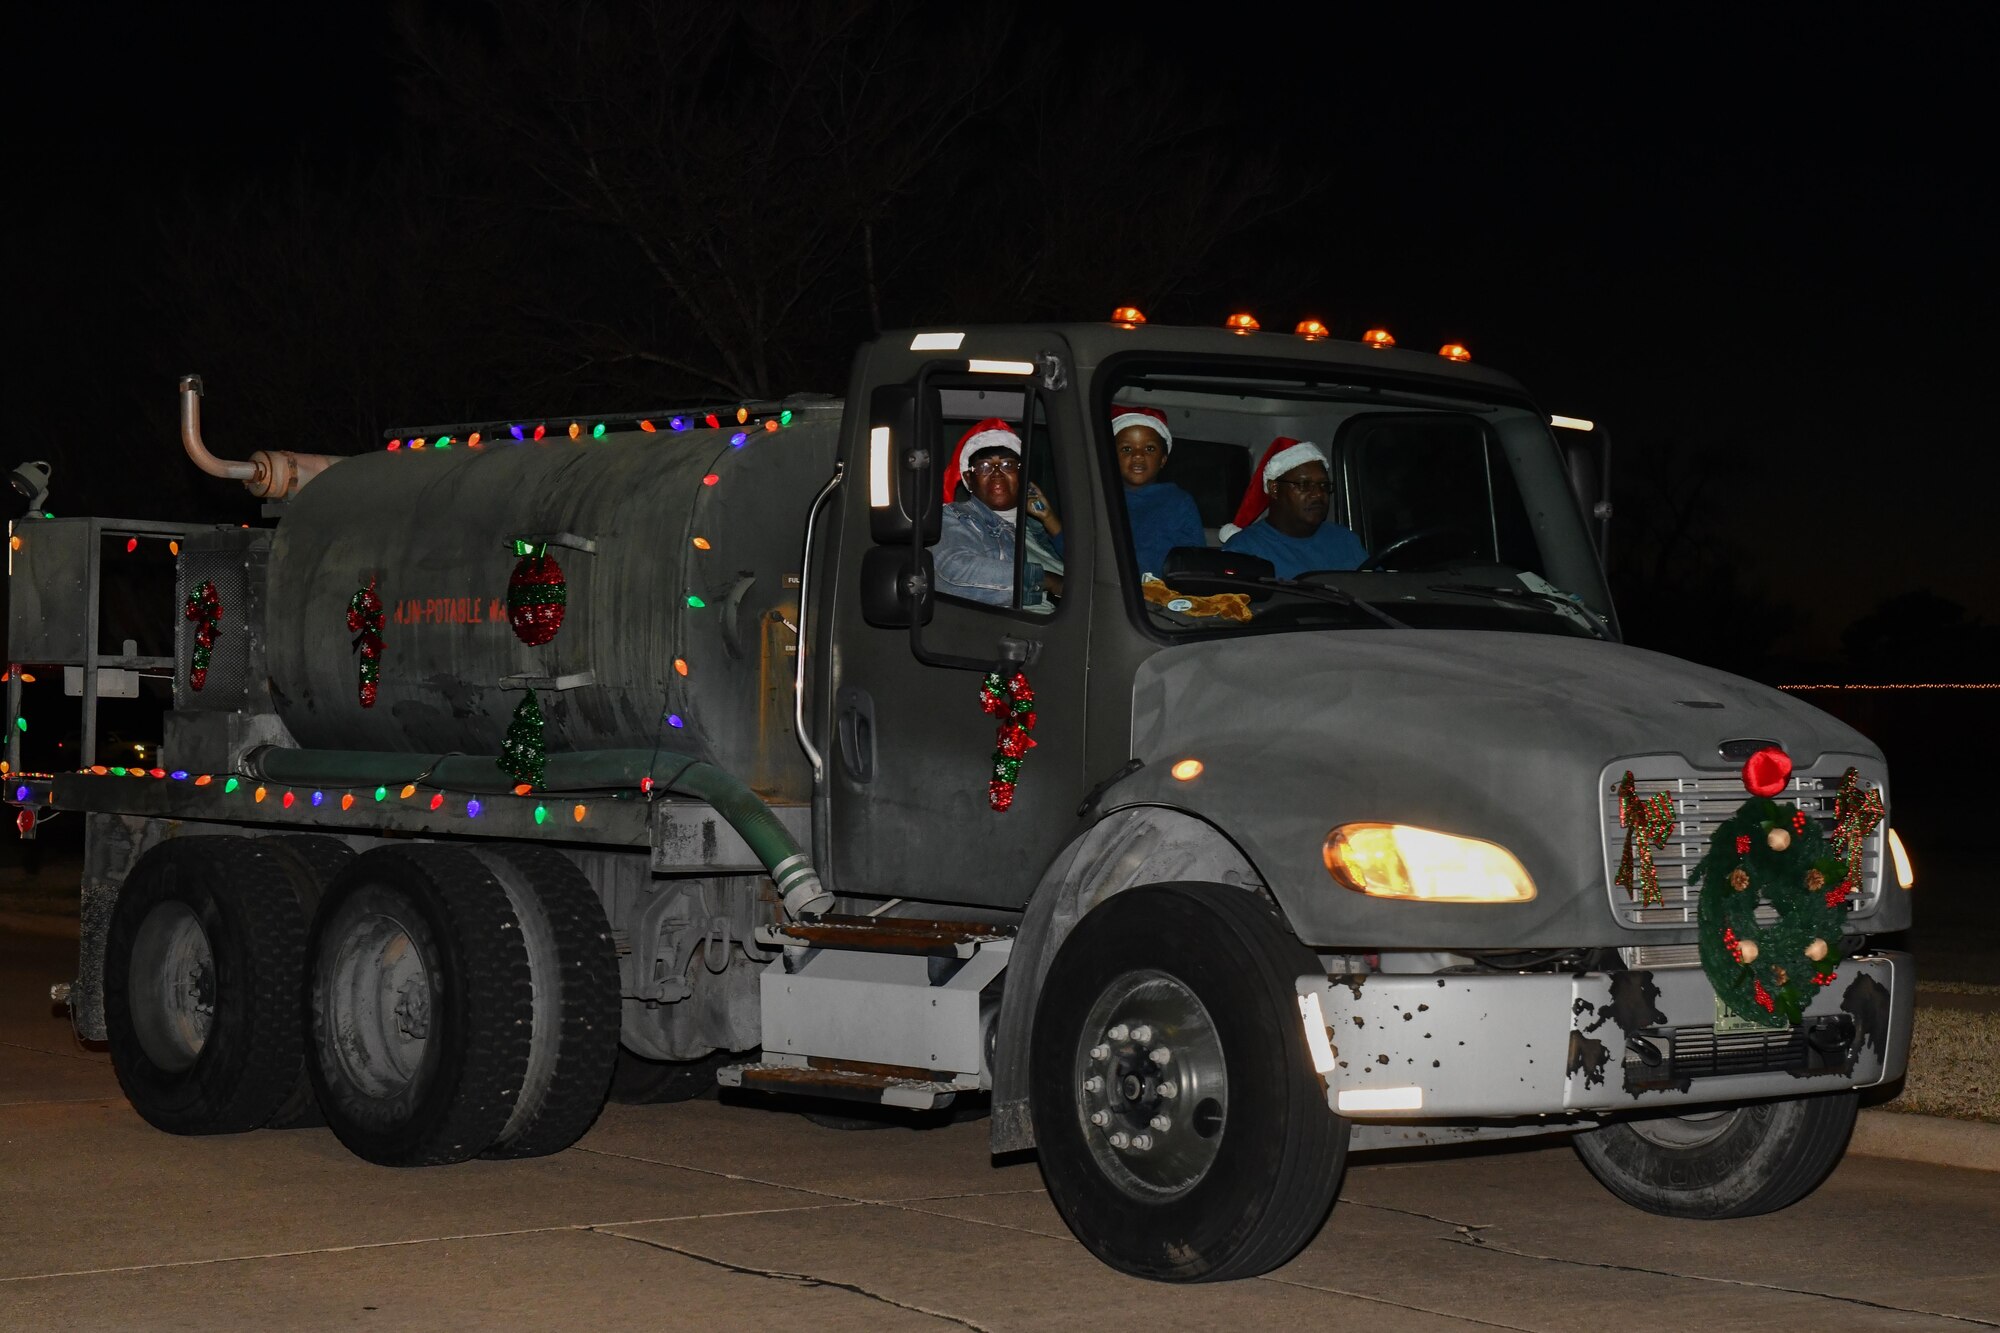 Donald Johnson, 97th Civil Engineer Squadron crane operator, and his wife and grandson, Jerri and Jahbari, drive a tanker truck during a holiday parade at Altus Air Force Base, Oklahoma, Dec. 13, 2022. This is Altus Air Force Base’s third annual holiday parade and was hosted by the 97th Civil Engineer Squadron. (U.S. Air Force photo by Airman 1st Class Miyah Gray)